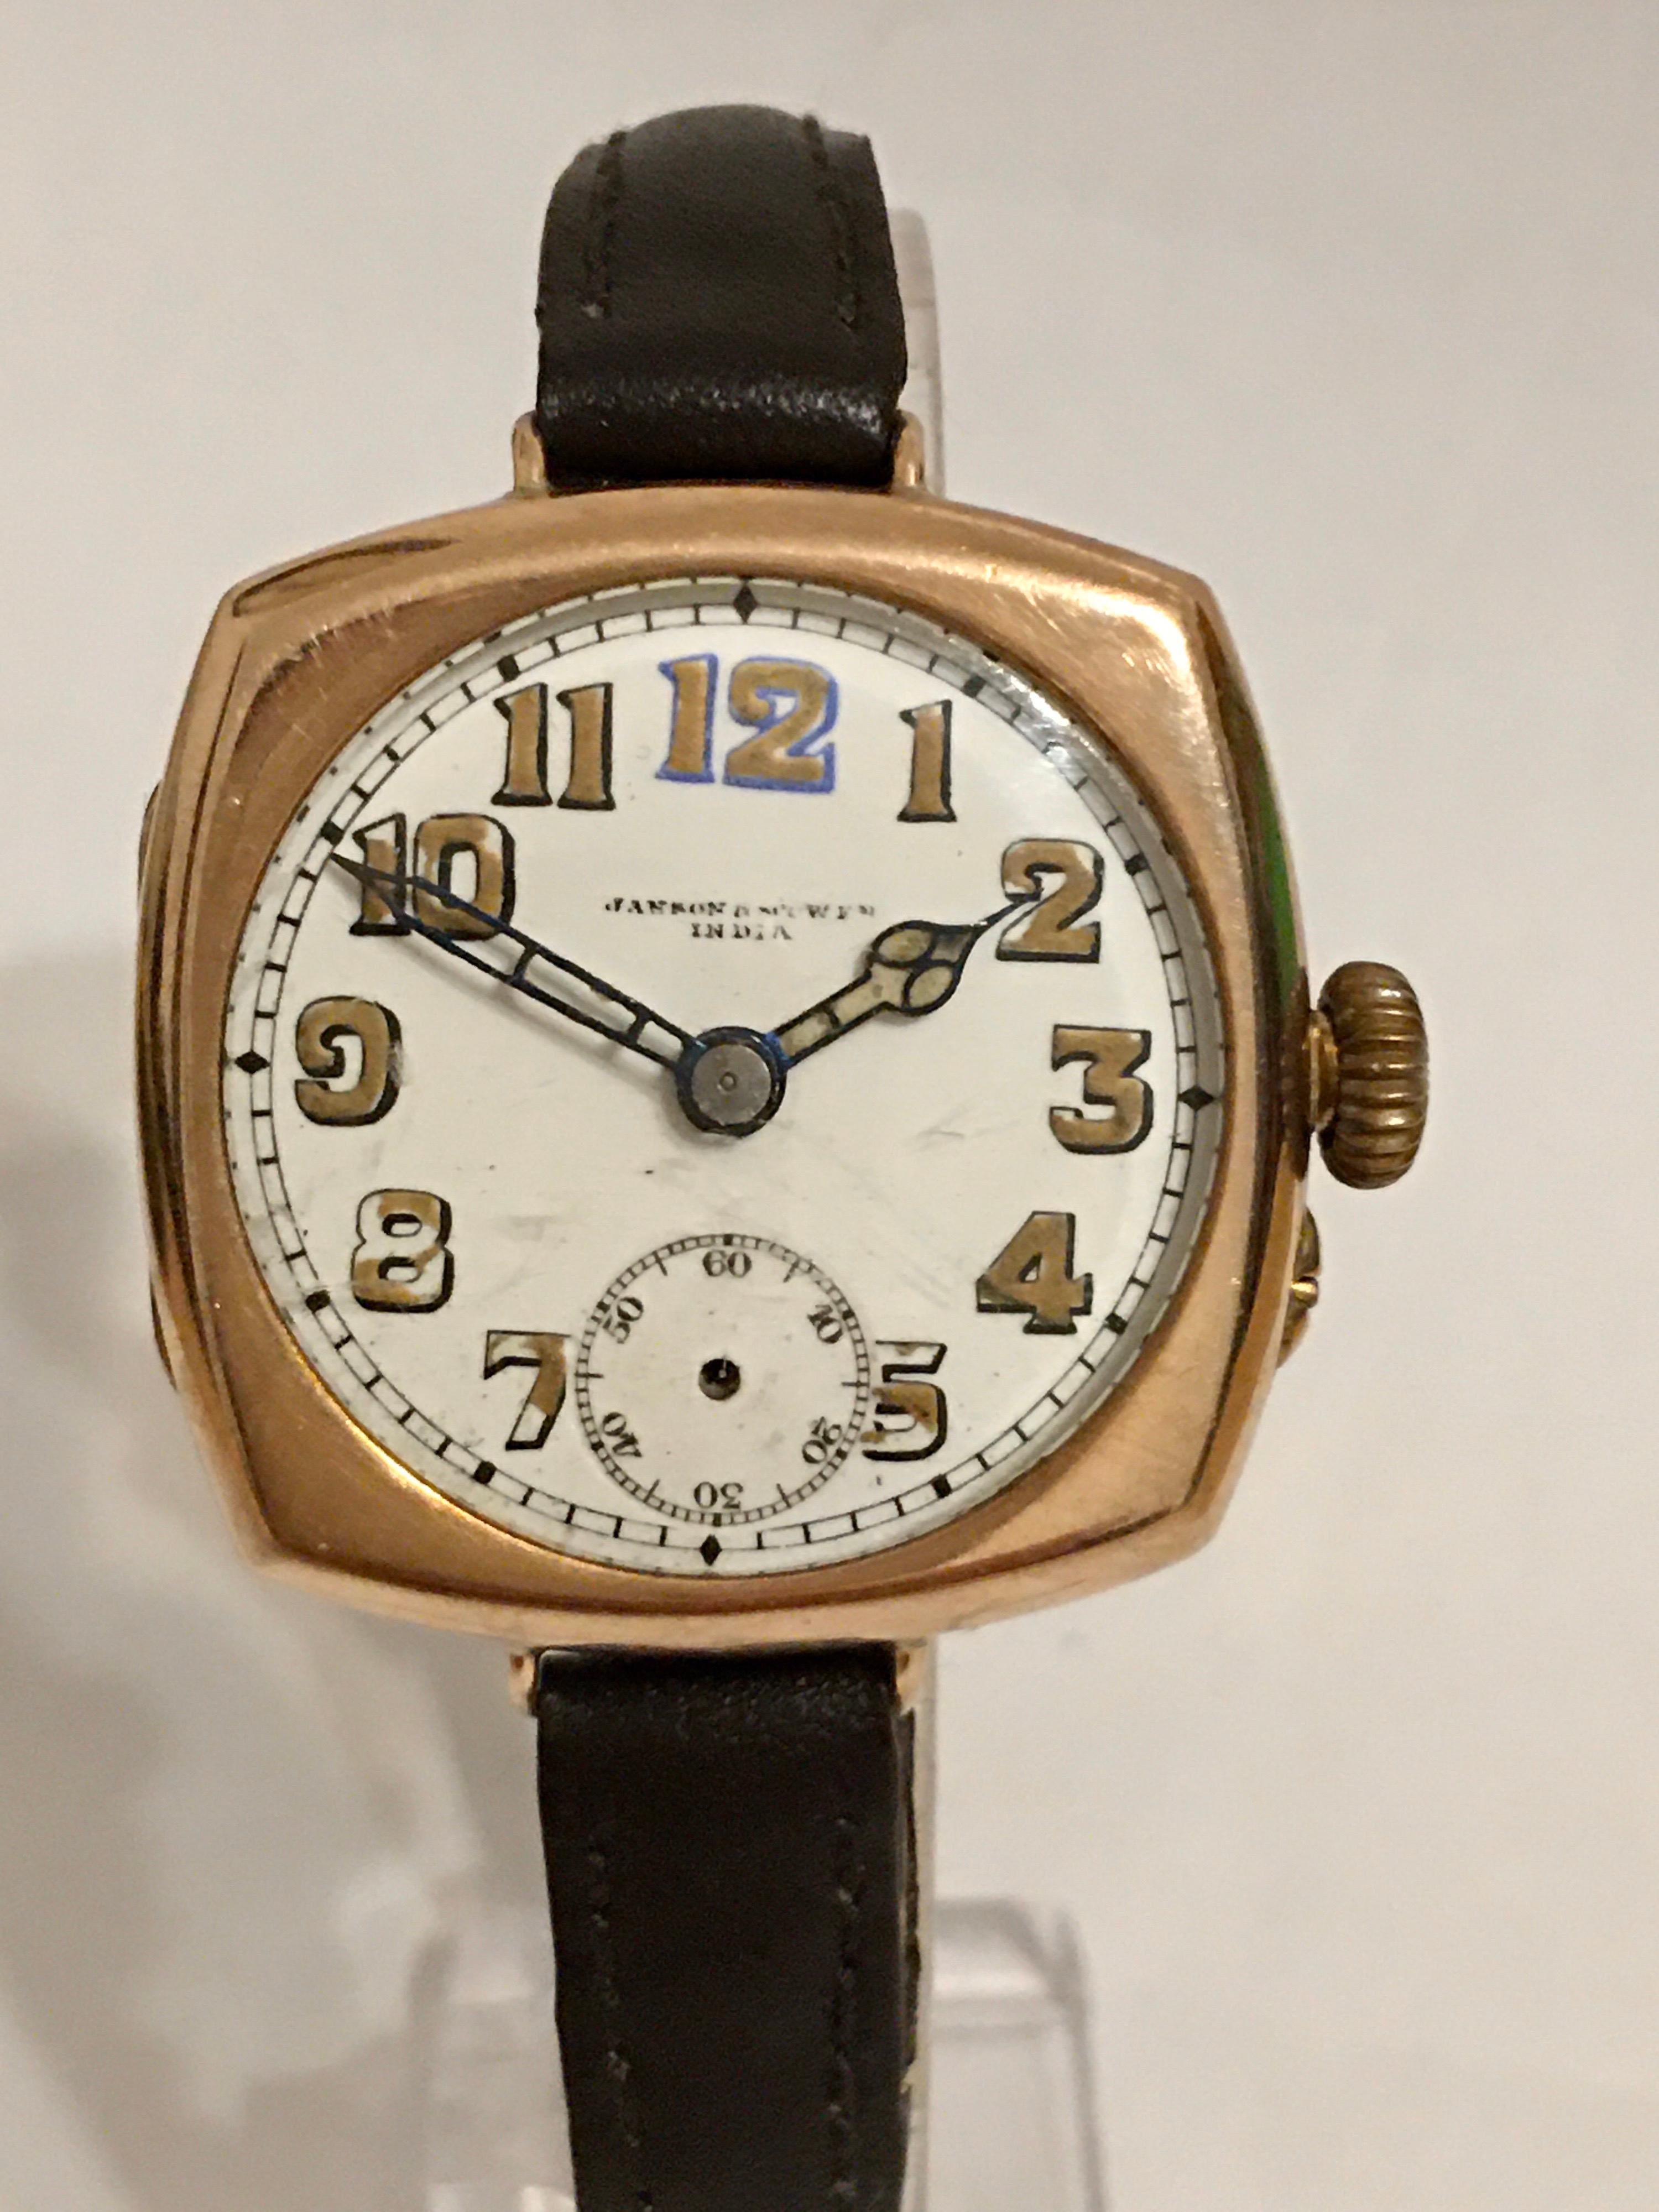 This beautiful hand-winding watch is working and ticking. The secondary hand is missing. The dial and it’s Arabic numerals & hands are worn as shown. Tiny dents and scratches on the watch case as show.

Please study the images carefully as form part